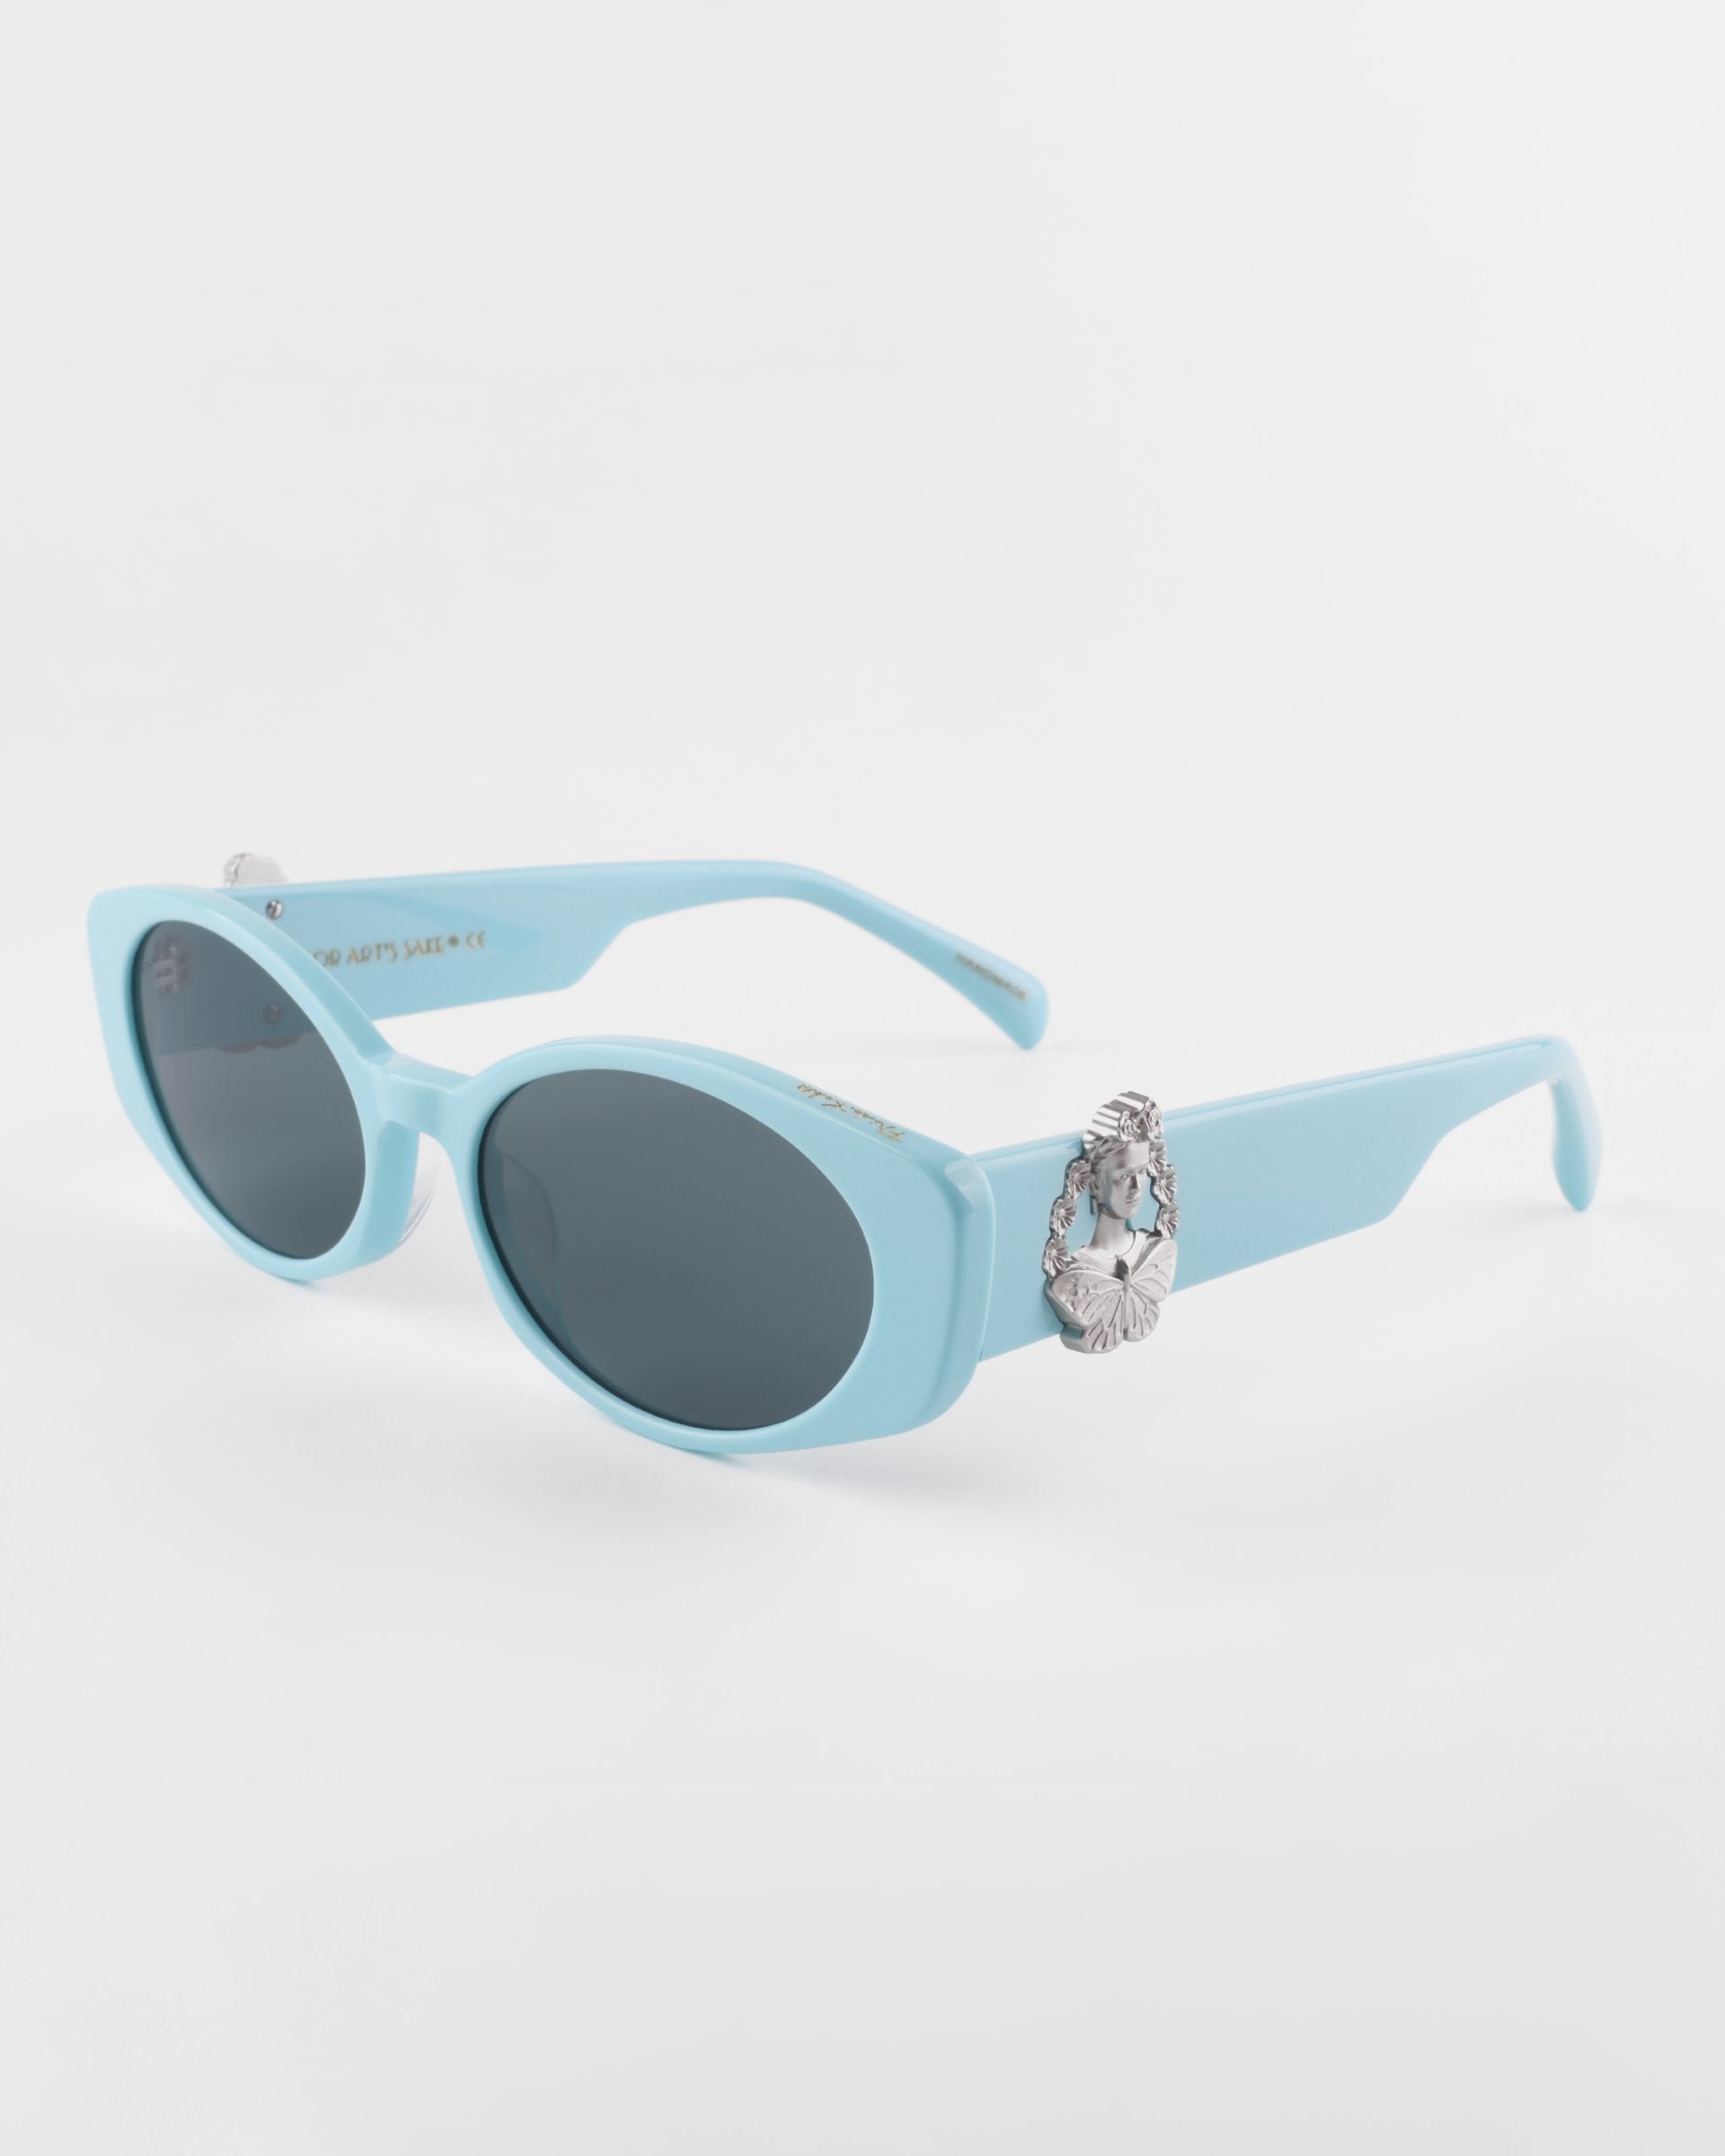 A pair of light blue, oval-shaped Frida Portrait sunglasses by For Art's Sake® with ultra-lightweight Nylon lenses that provide 100% UVA & UVB protection. The frame features decorative silver embellishments on the sides, adding a touch of uniqueness to the design. The background is plain white, highlighting the stylish eyewear.